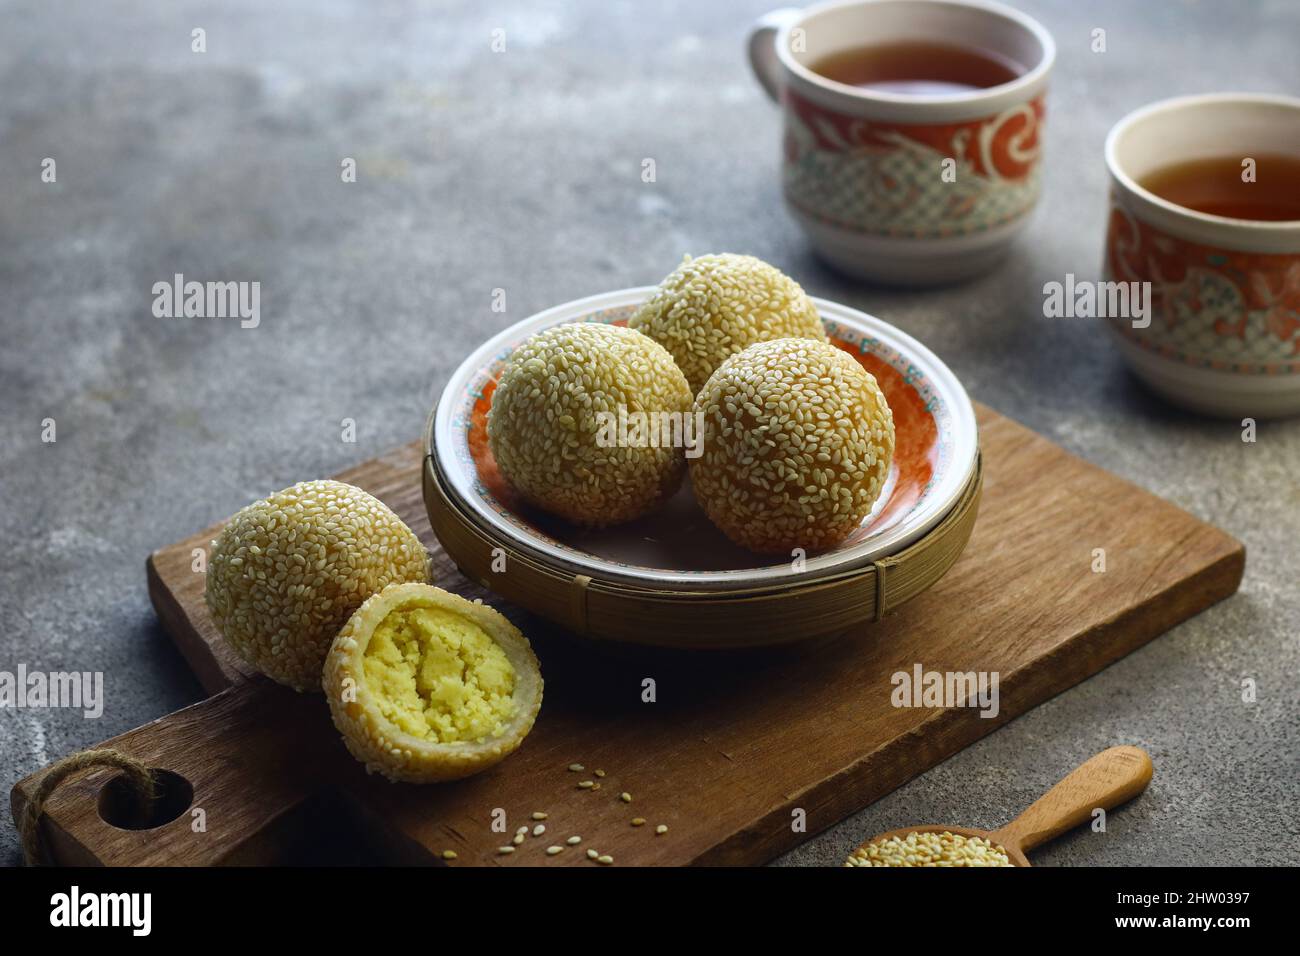 Onde Onde or glutinous rice cake sesame ball on ceramic plate with cups tea. Selective focus, grey grainy background. Stock Photo